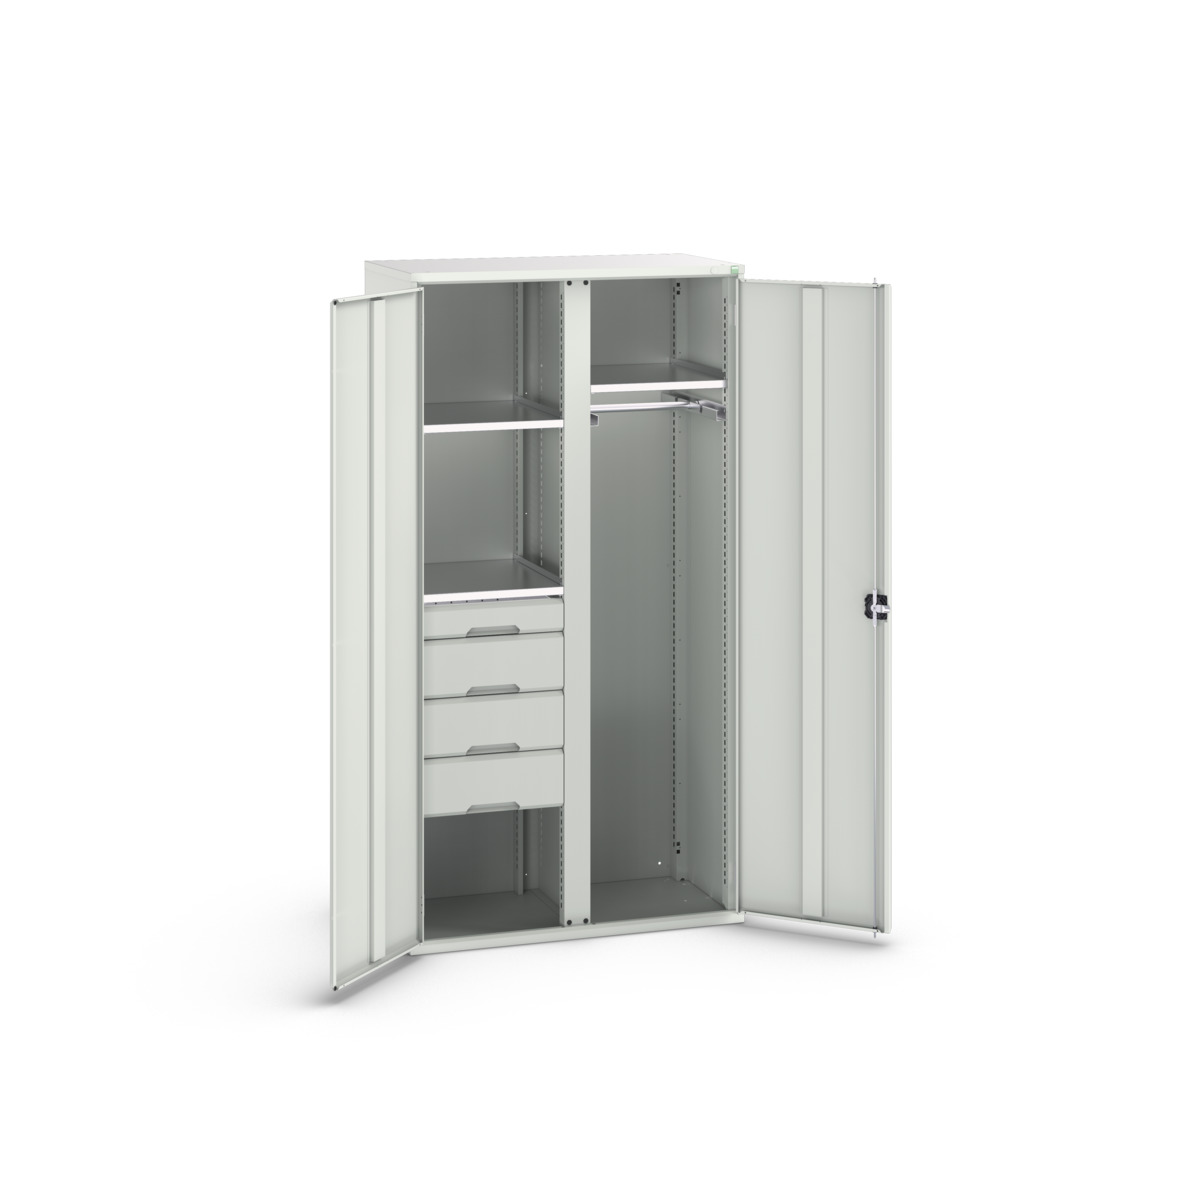 16926581.16 - verso kitted cupboard